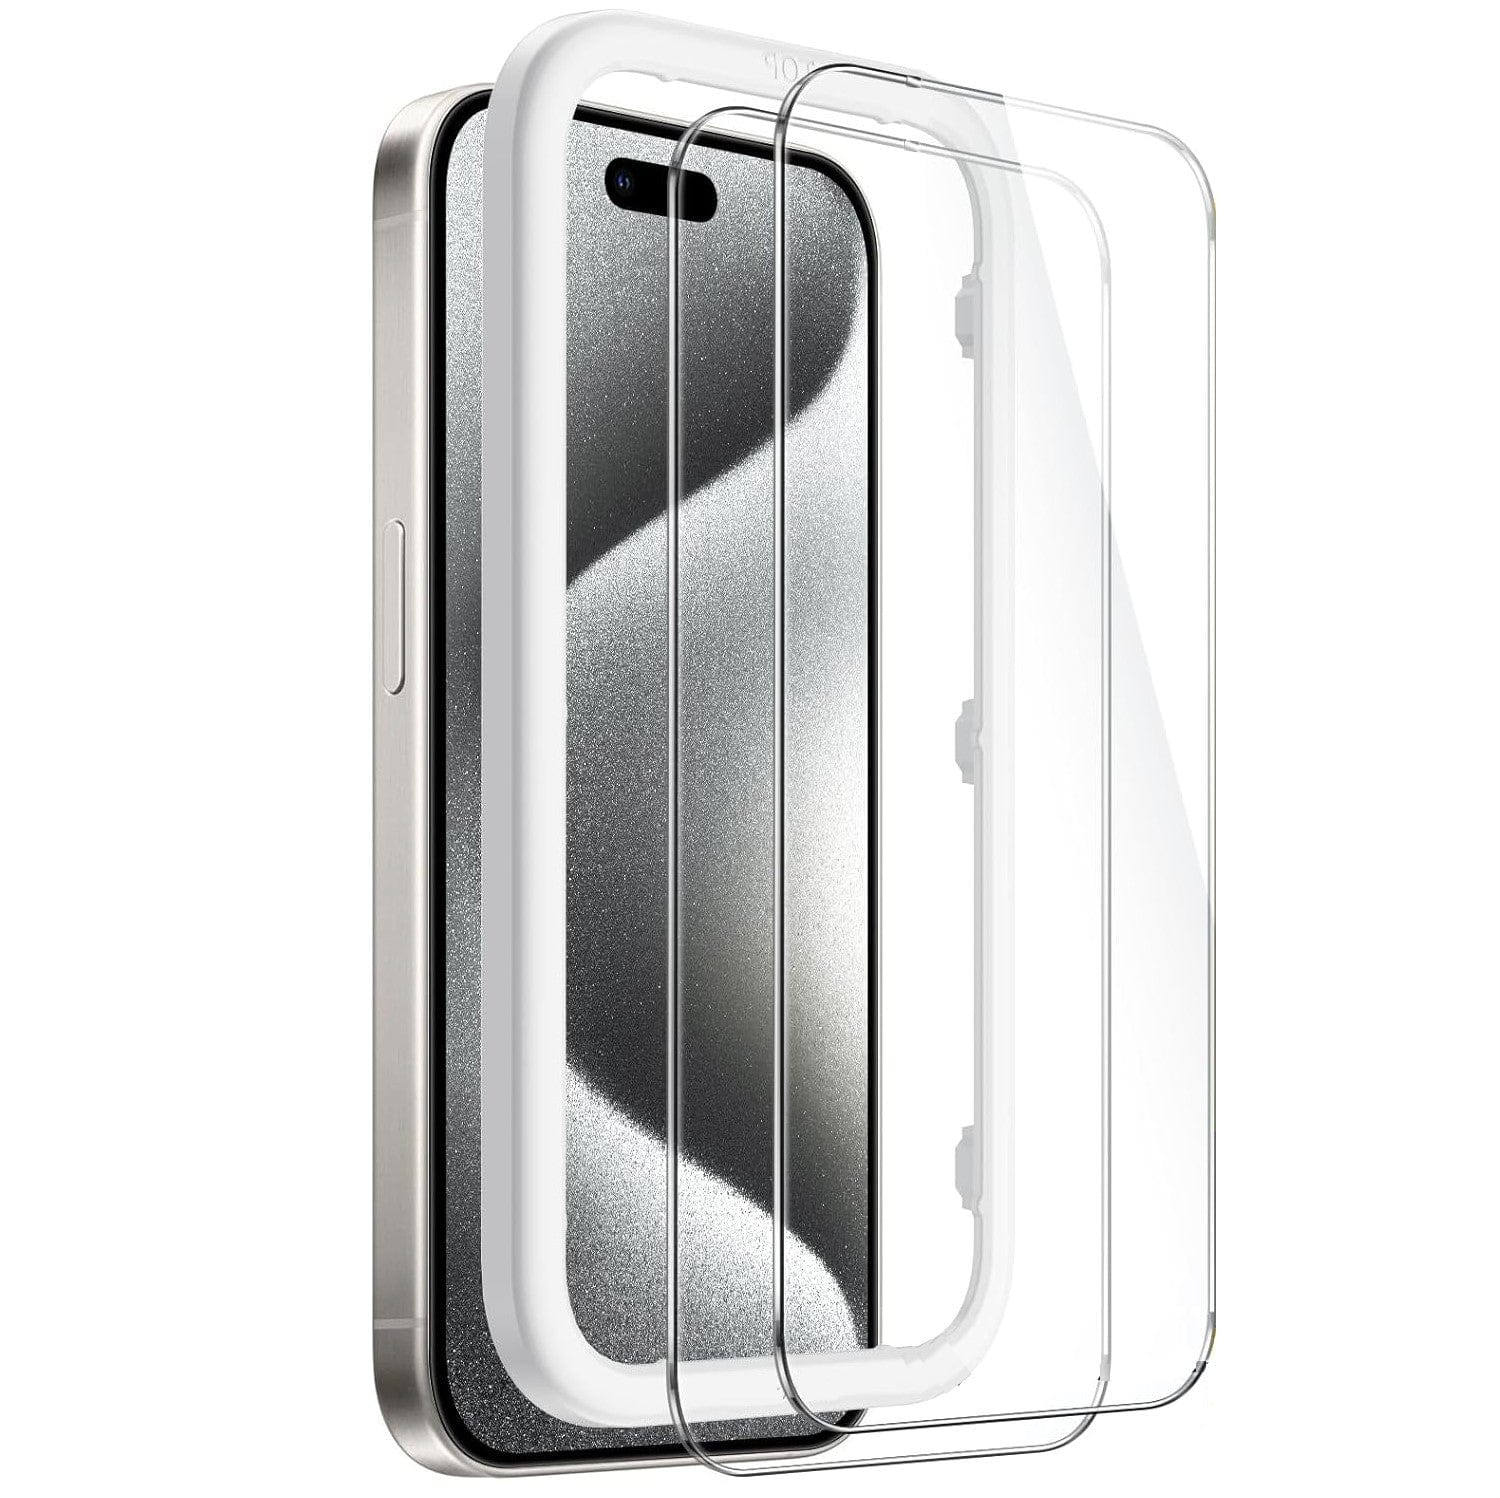 Apple iPhone 15 Tempered Glass